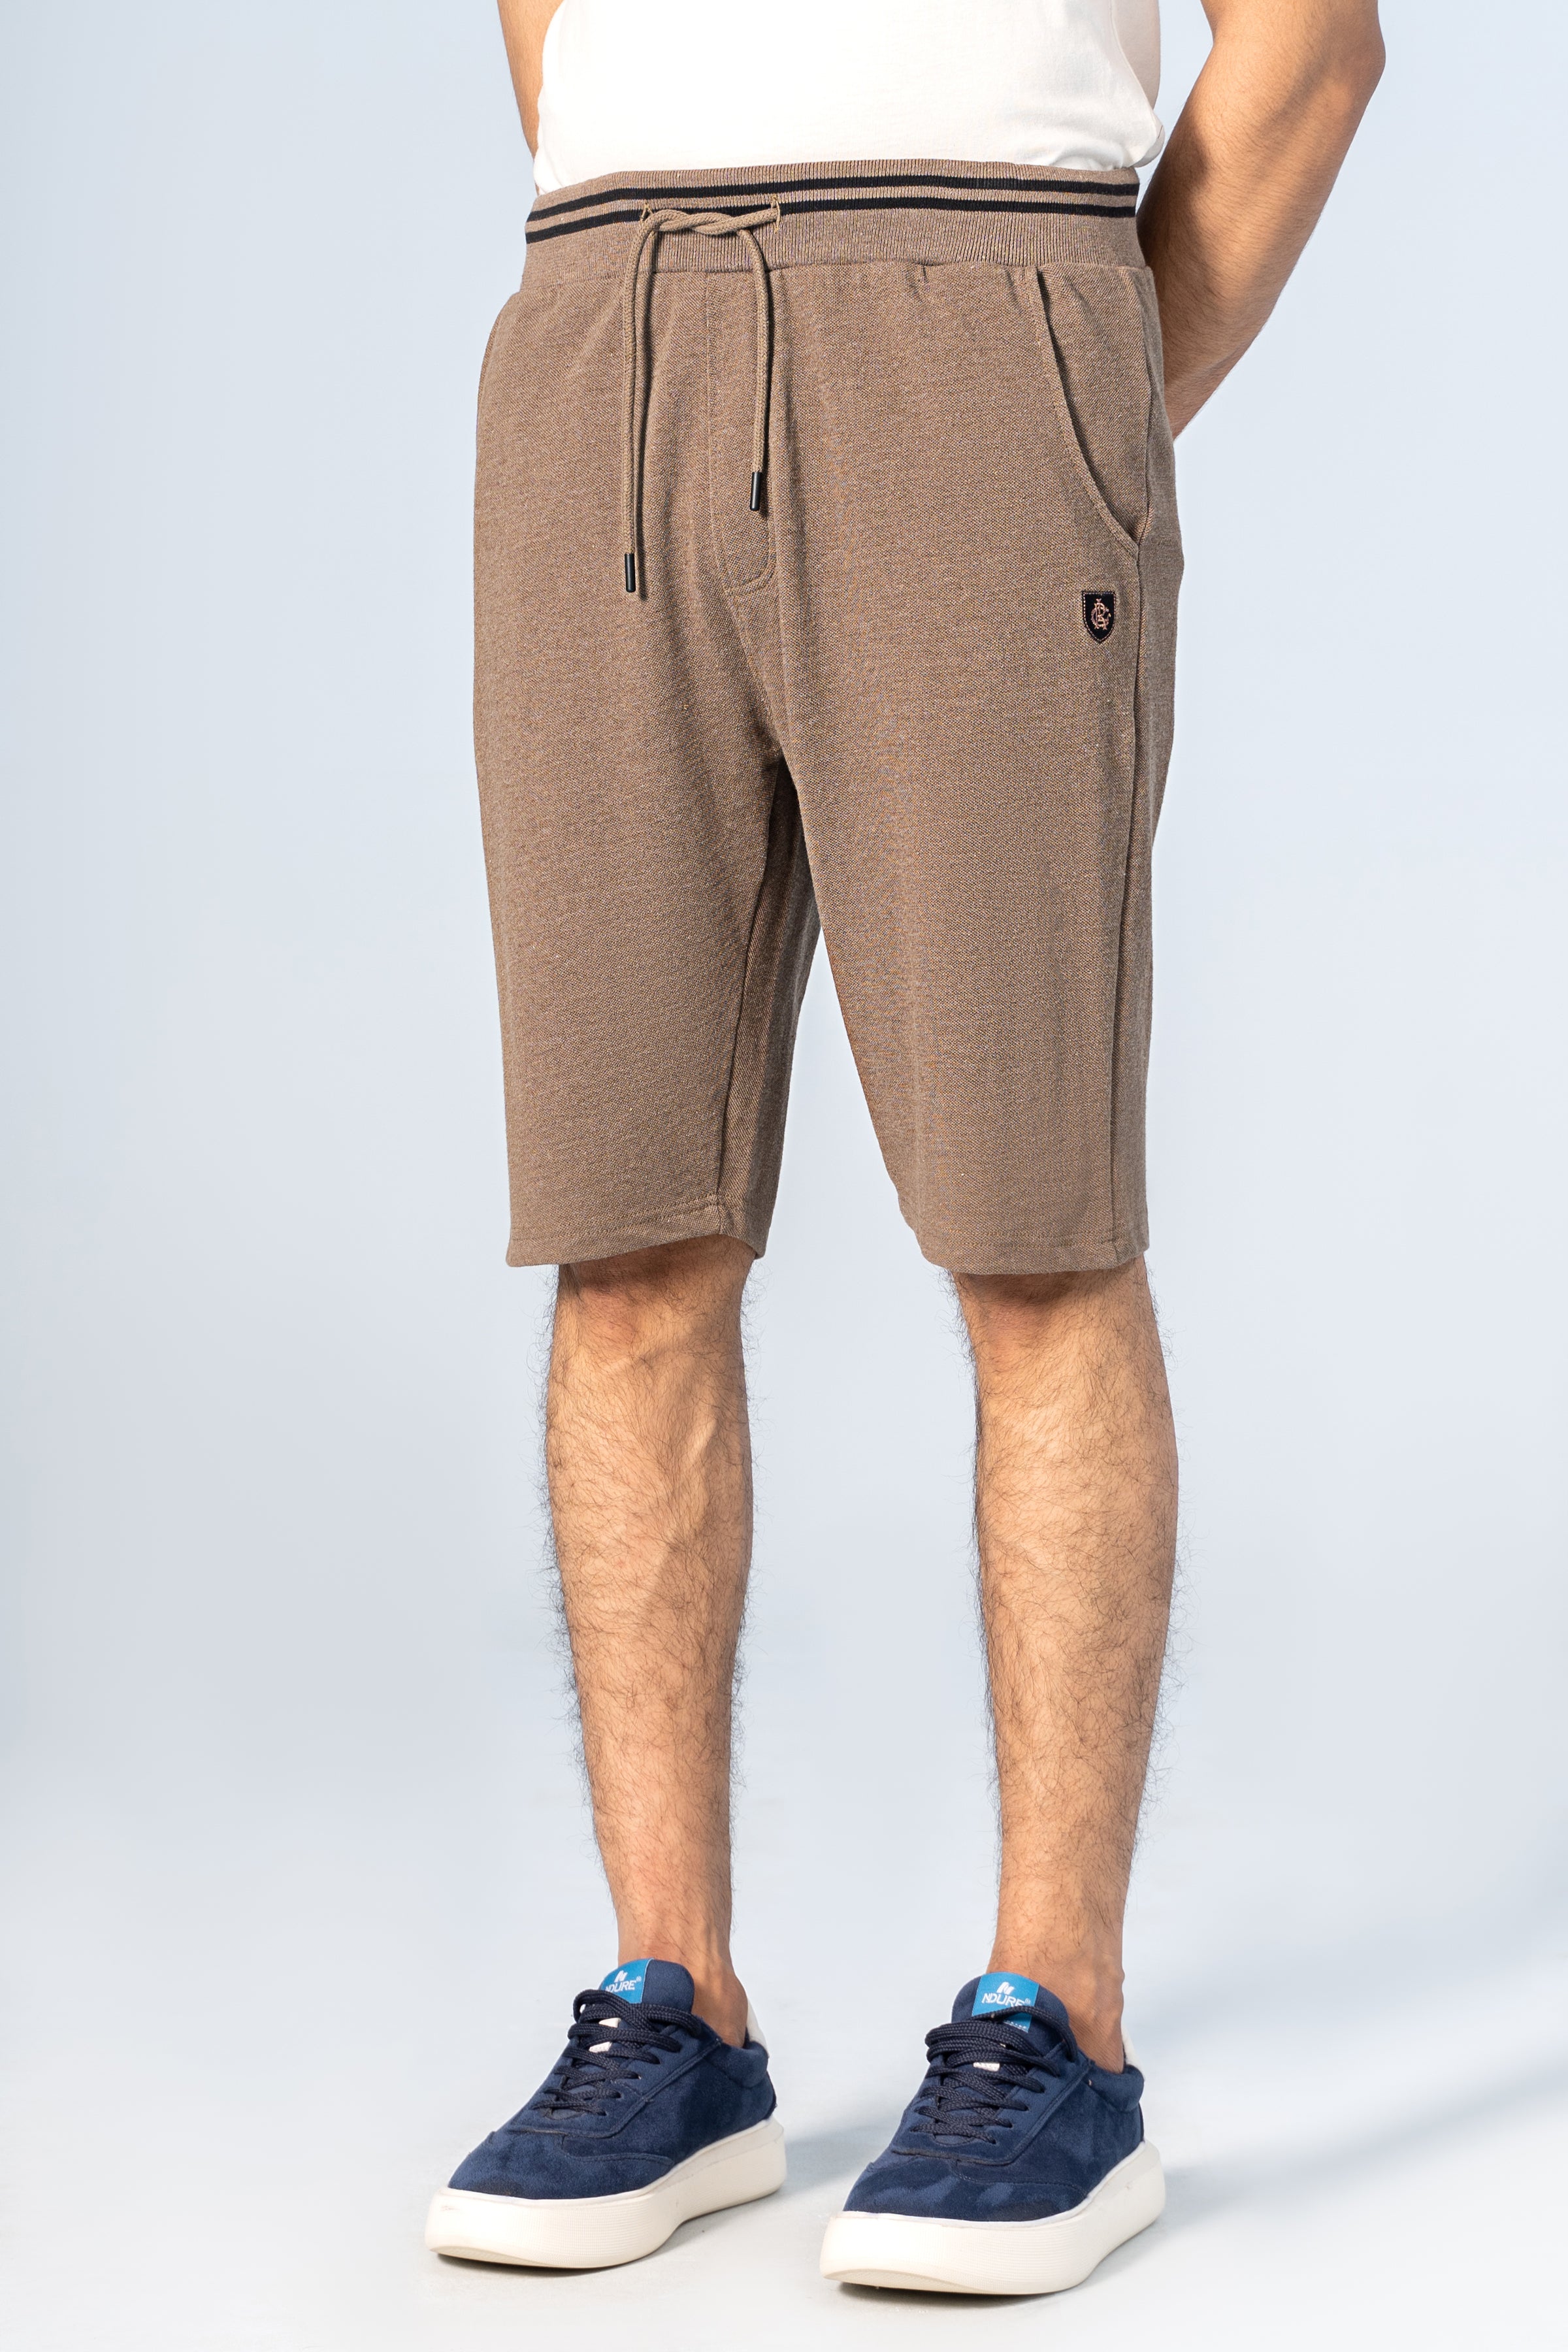 PIQUE TIPPING SHORTS DARK OLIVE - Charcoal Clothing